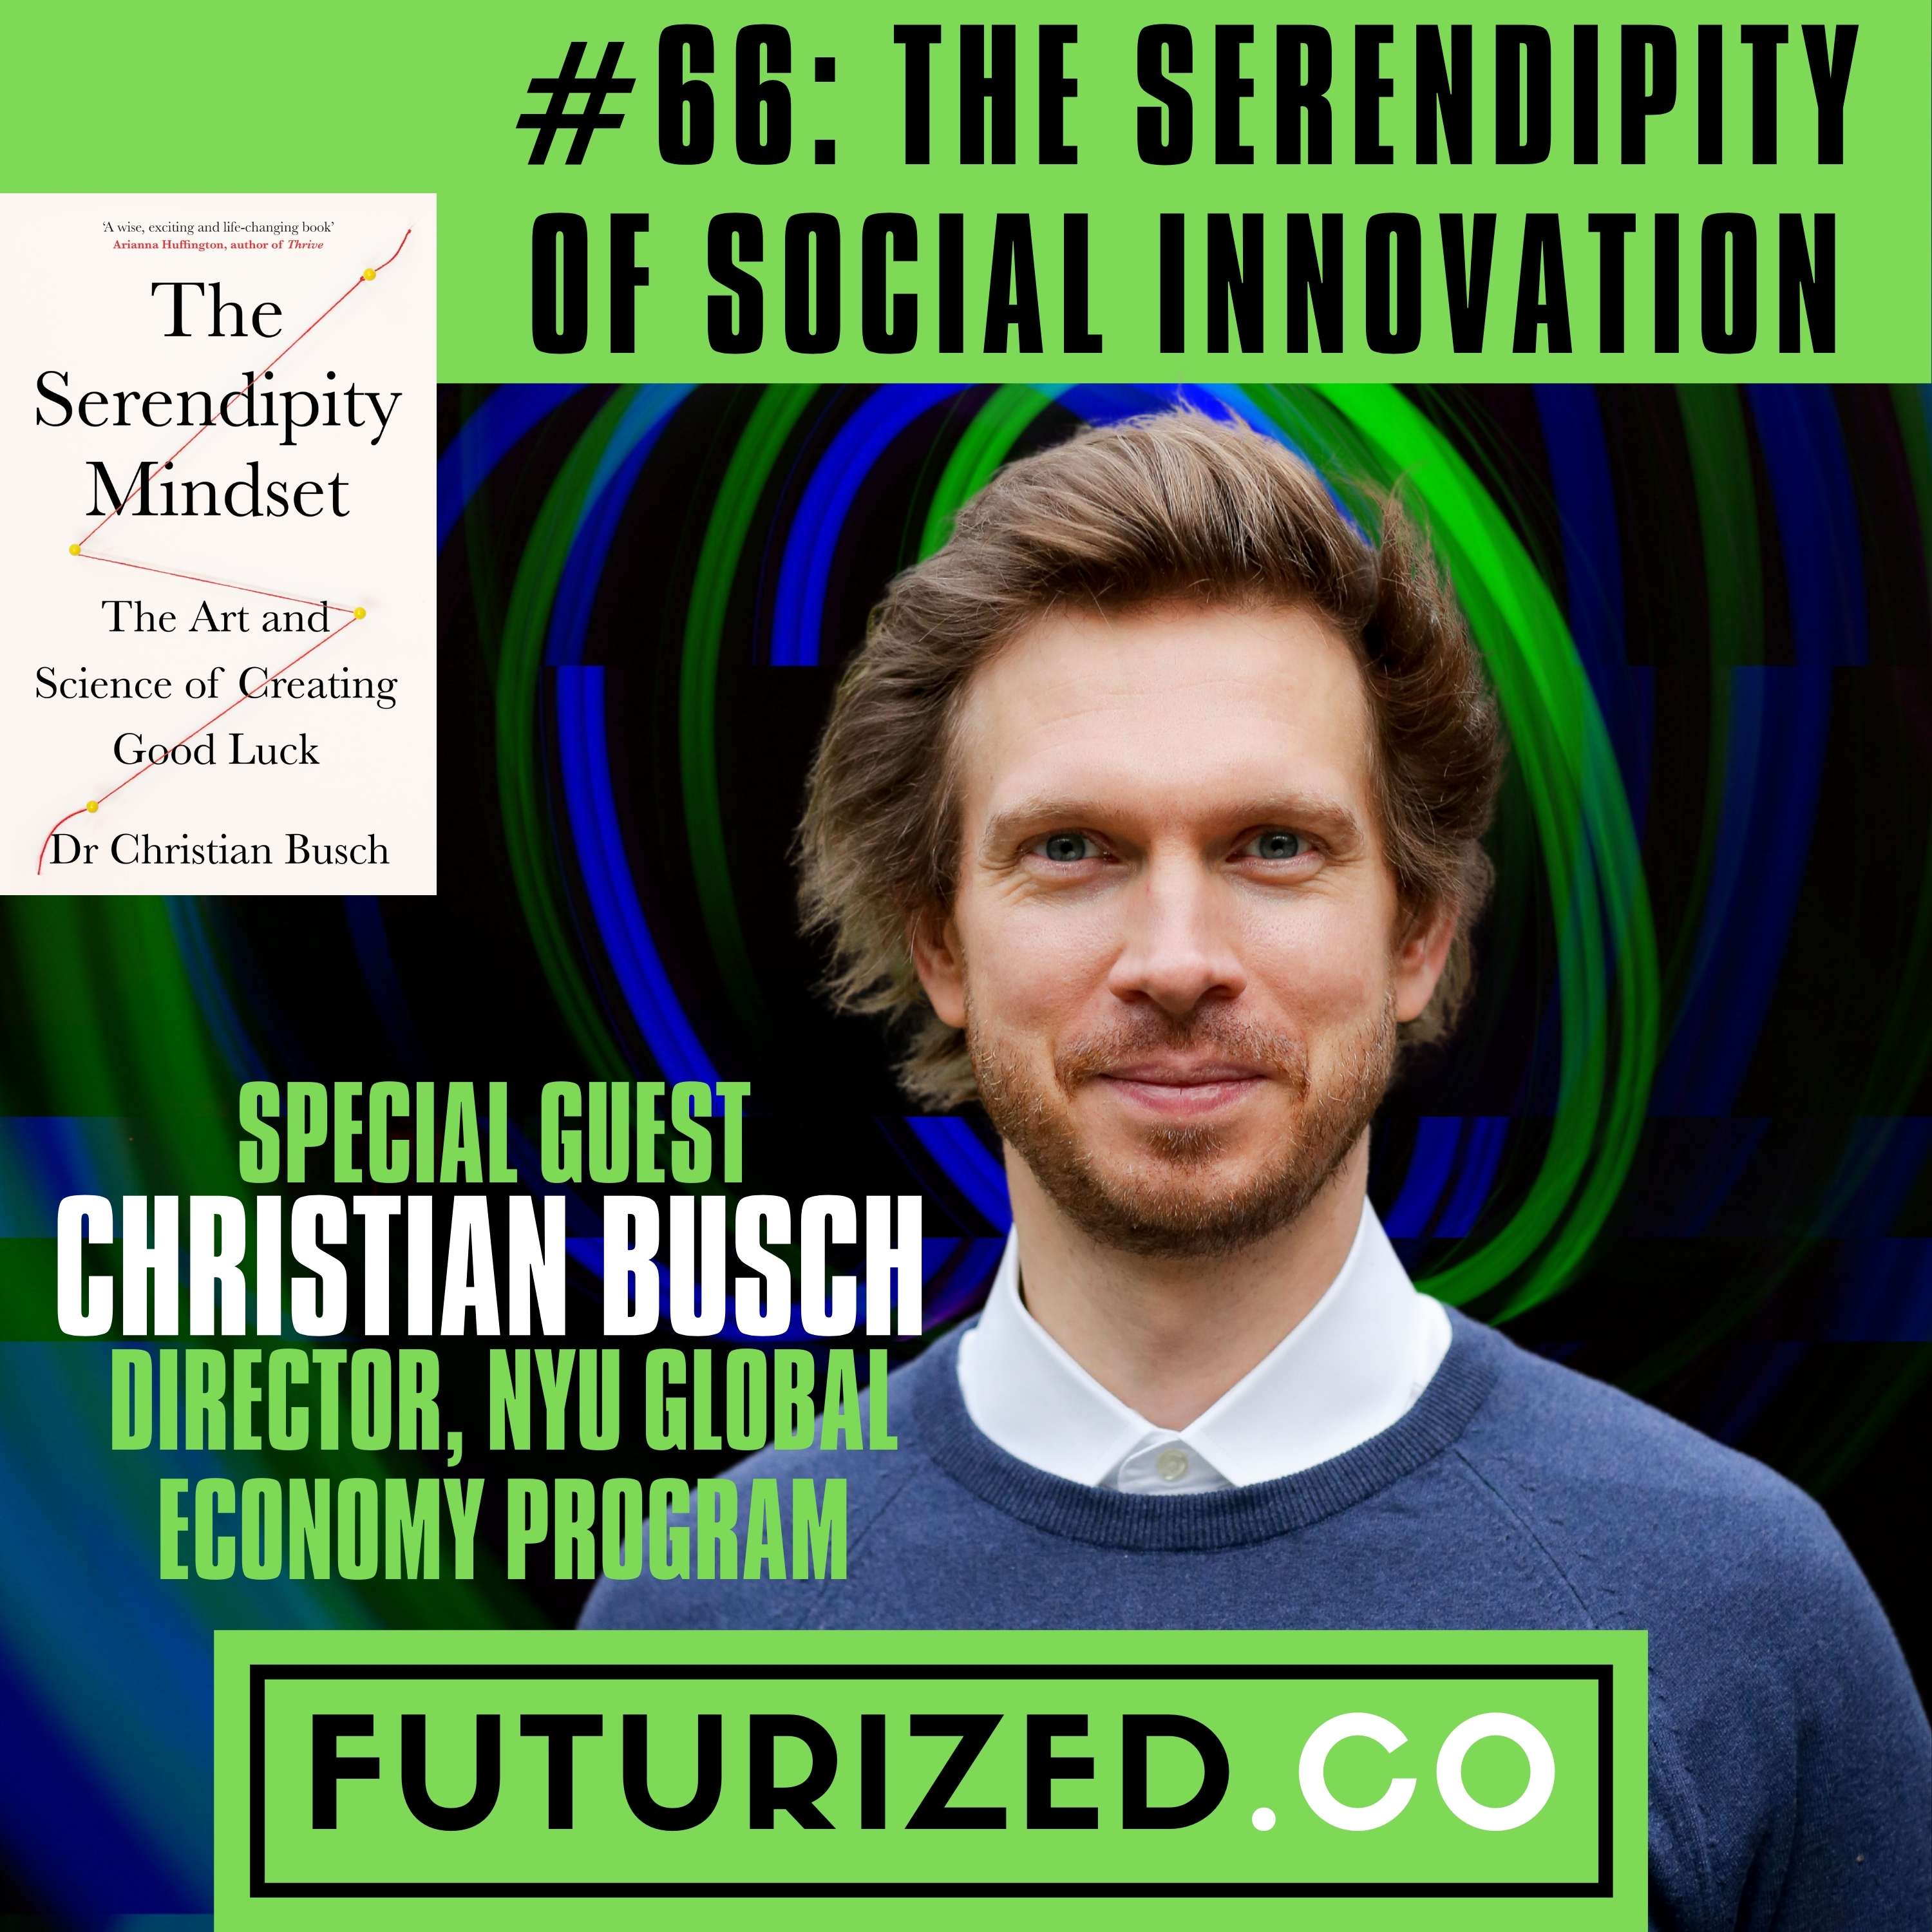 The Serendipity of Social Innovation Image